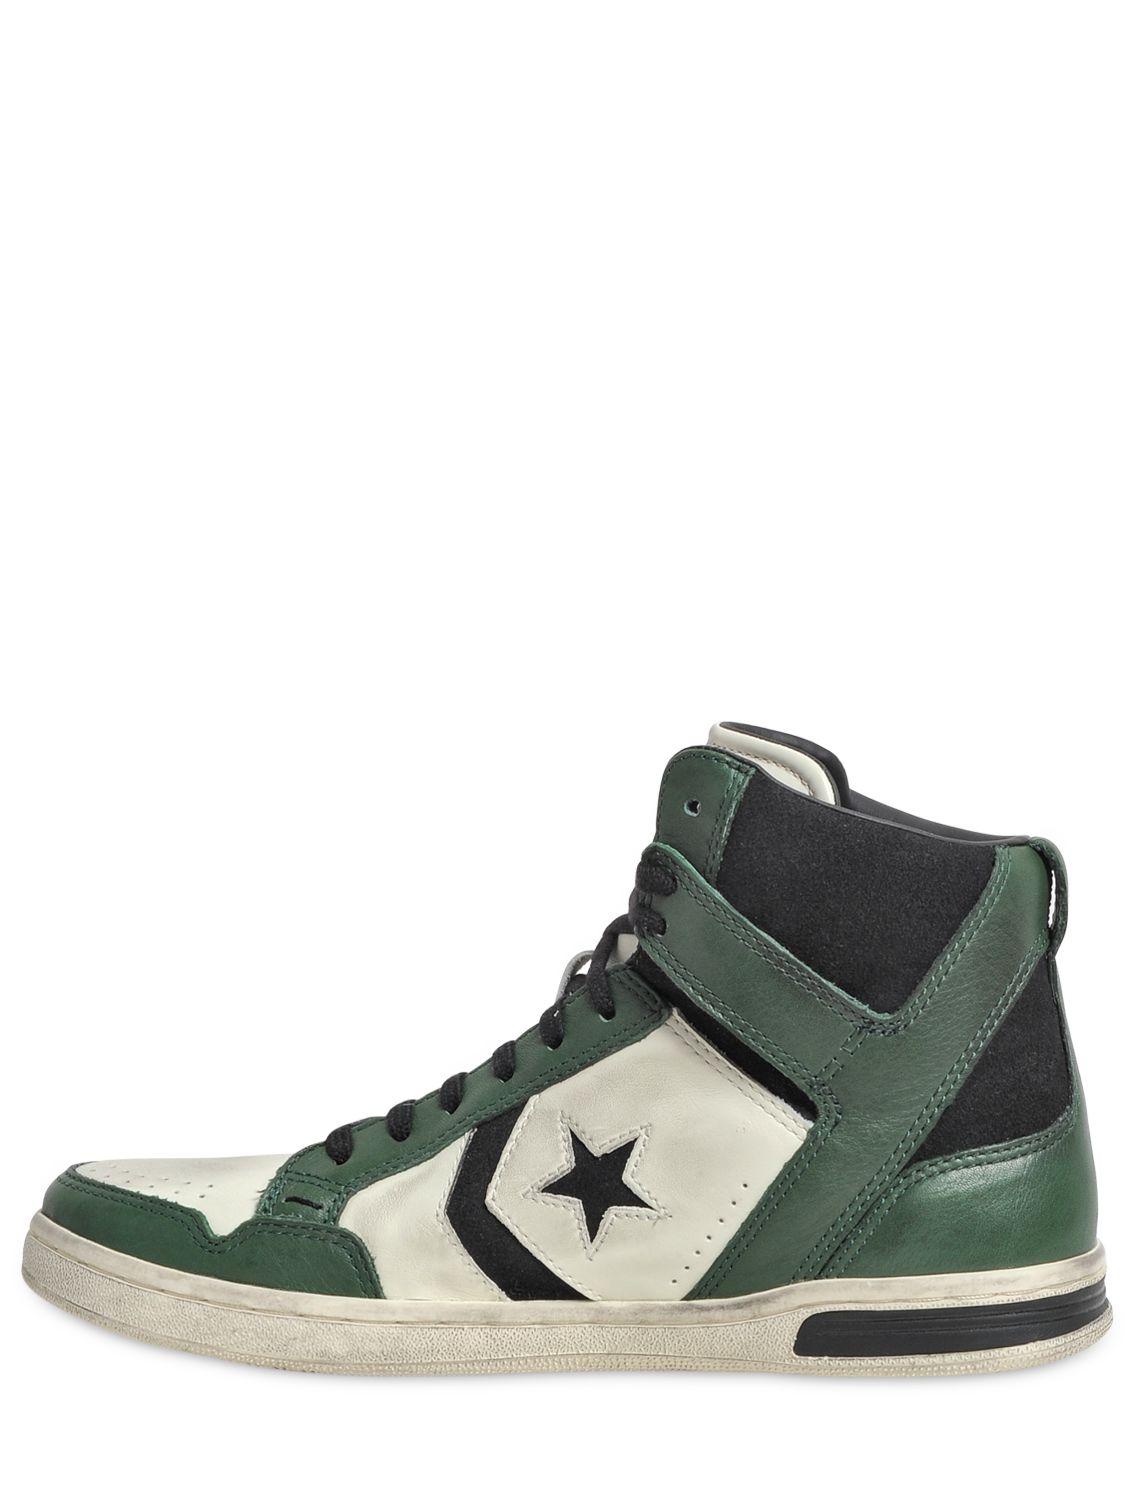 Converse Weapon Leather High Top Sneakers in Green for Men | Lyst